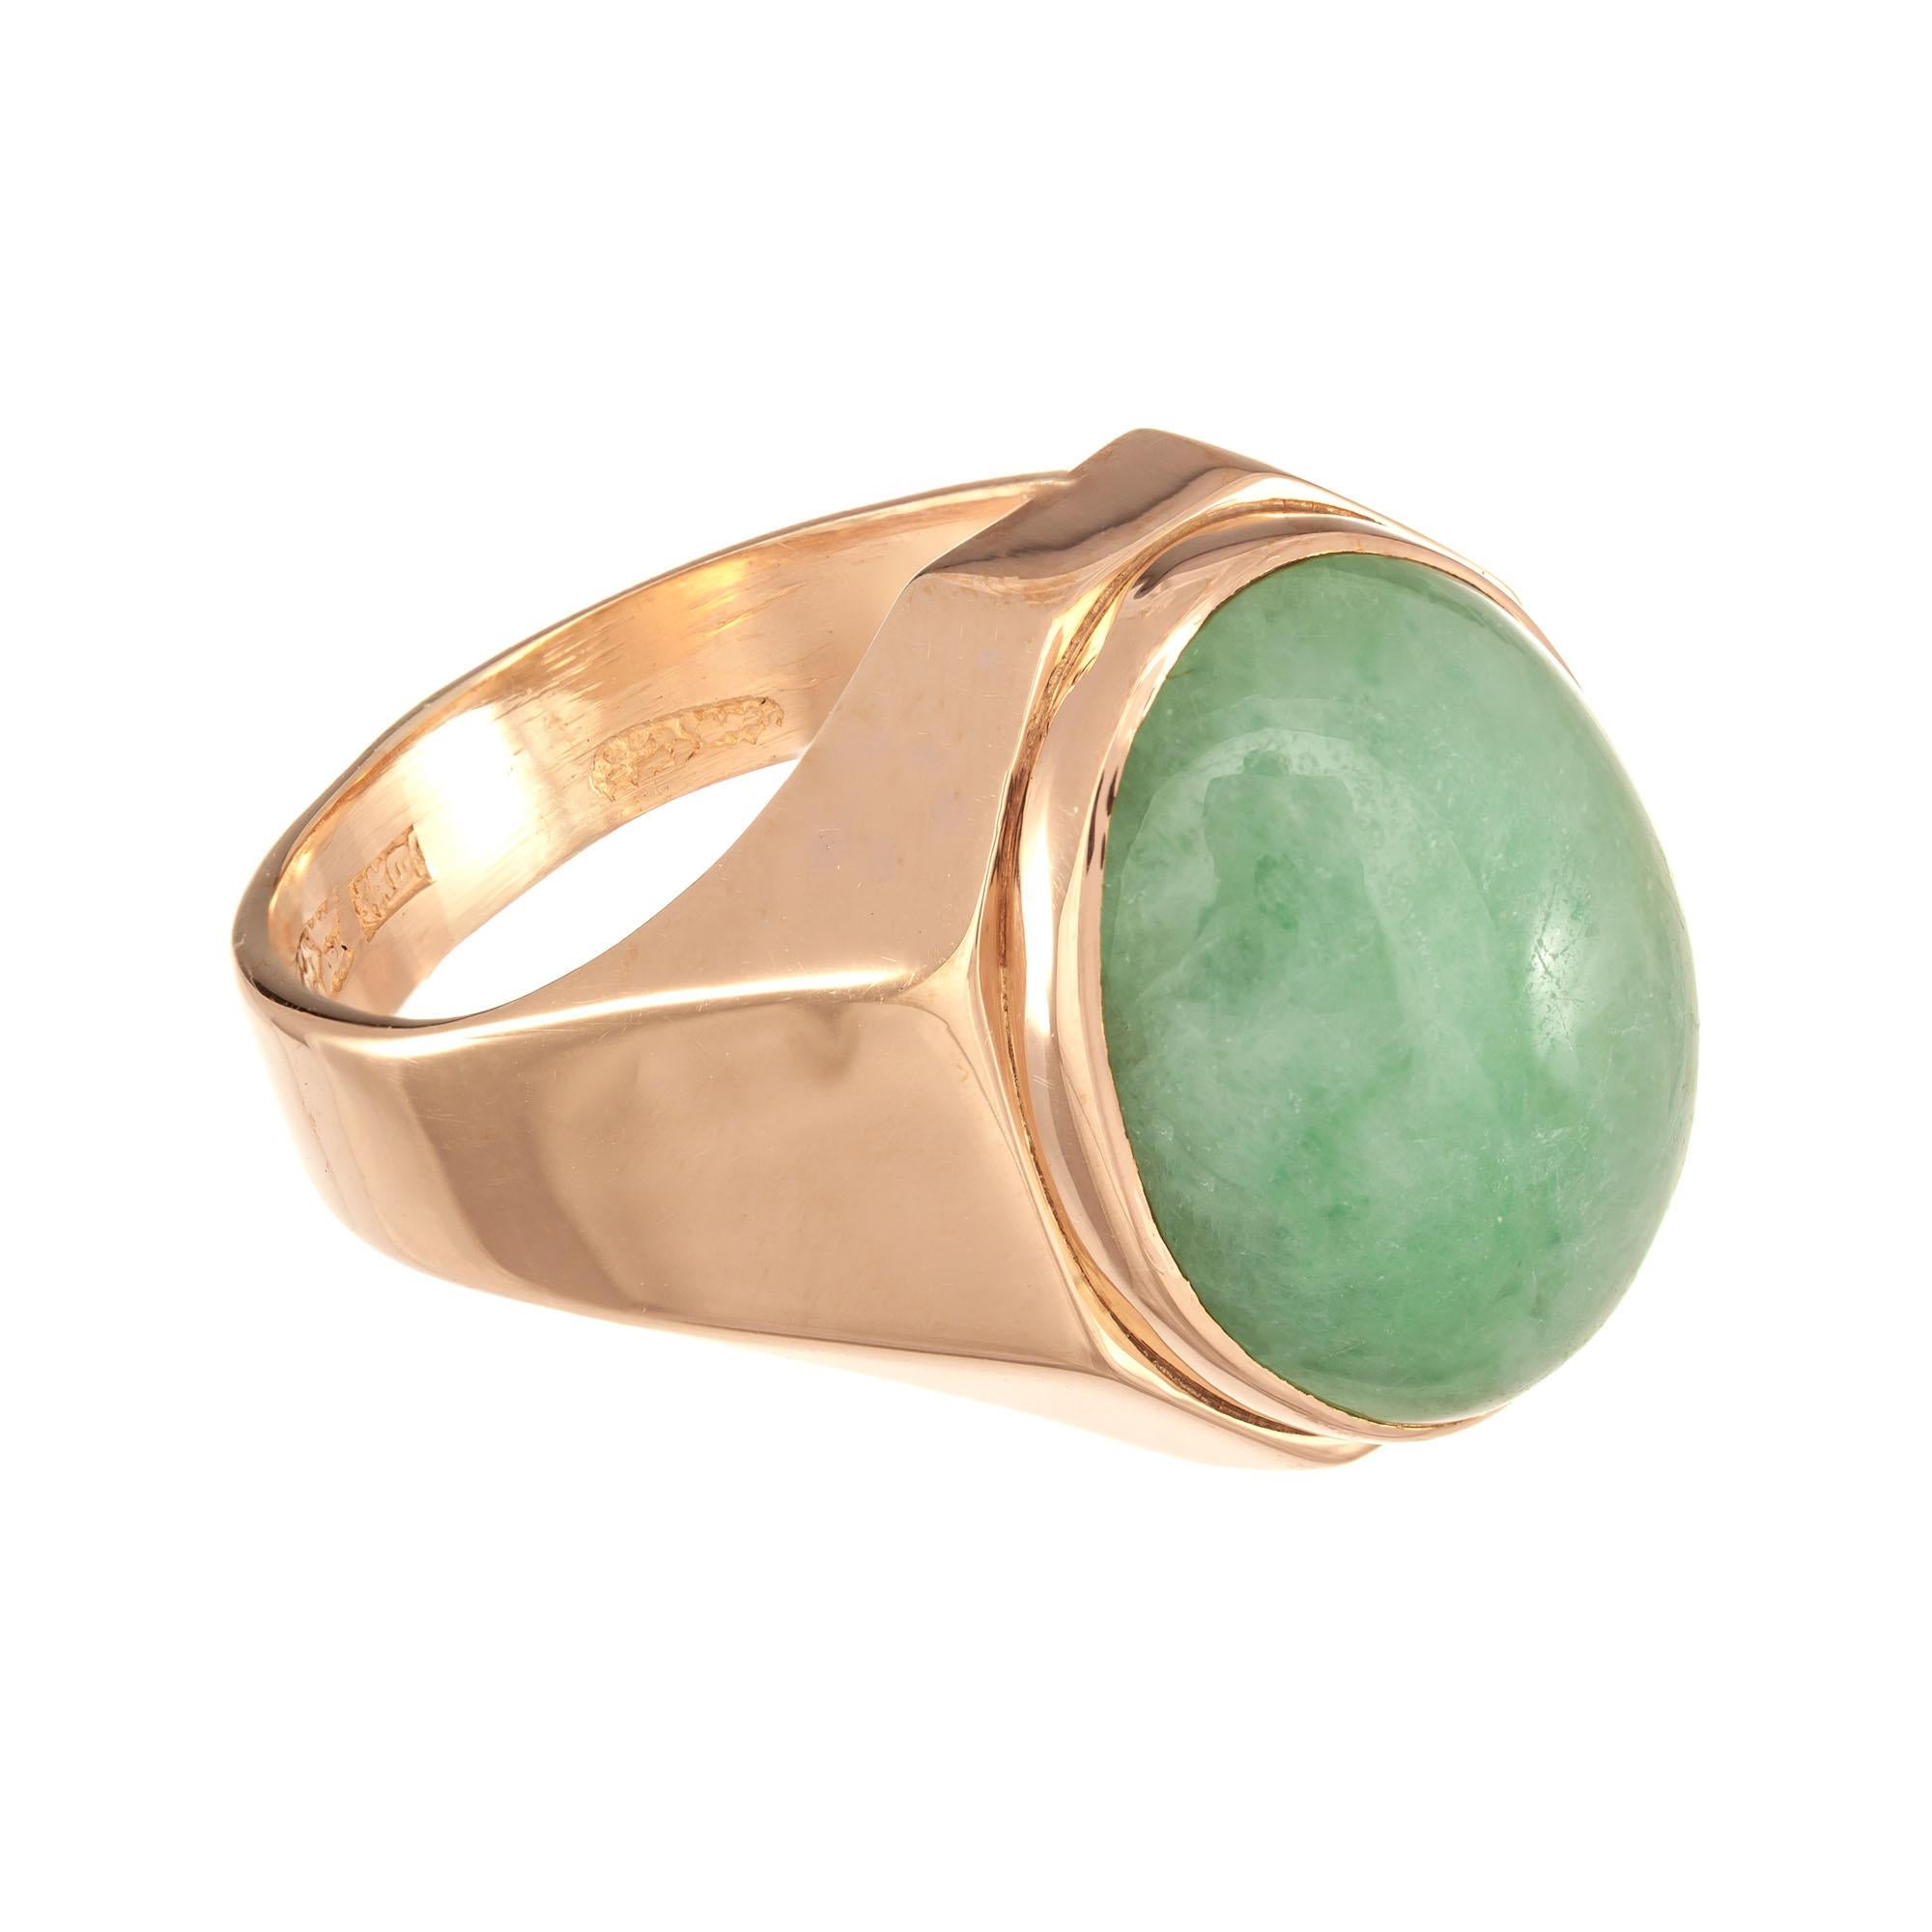 GIA certified natural untreated Jadeite unisex ring, Oval jade center stone set in 18k rose gold setting. 

1 oval cabochon mottled green Jadeite Jade GIA Certificate # 2203517929
Size 8.75 and sizable 
18k Rose Gold
Tested: 18k
10.1 grams
Width at